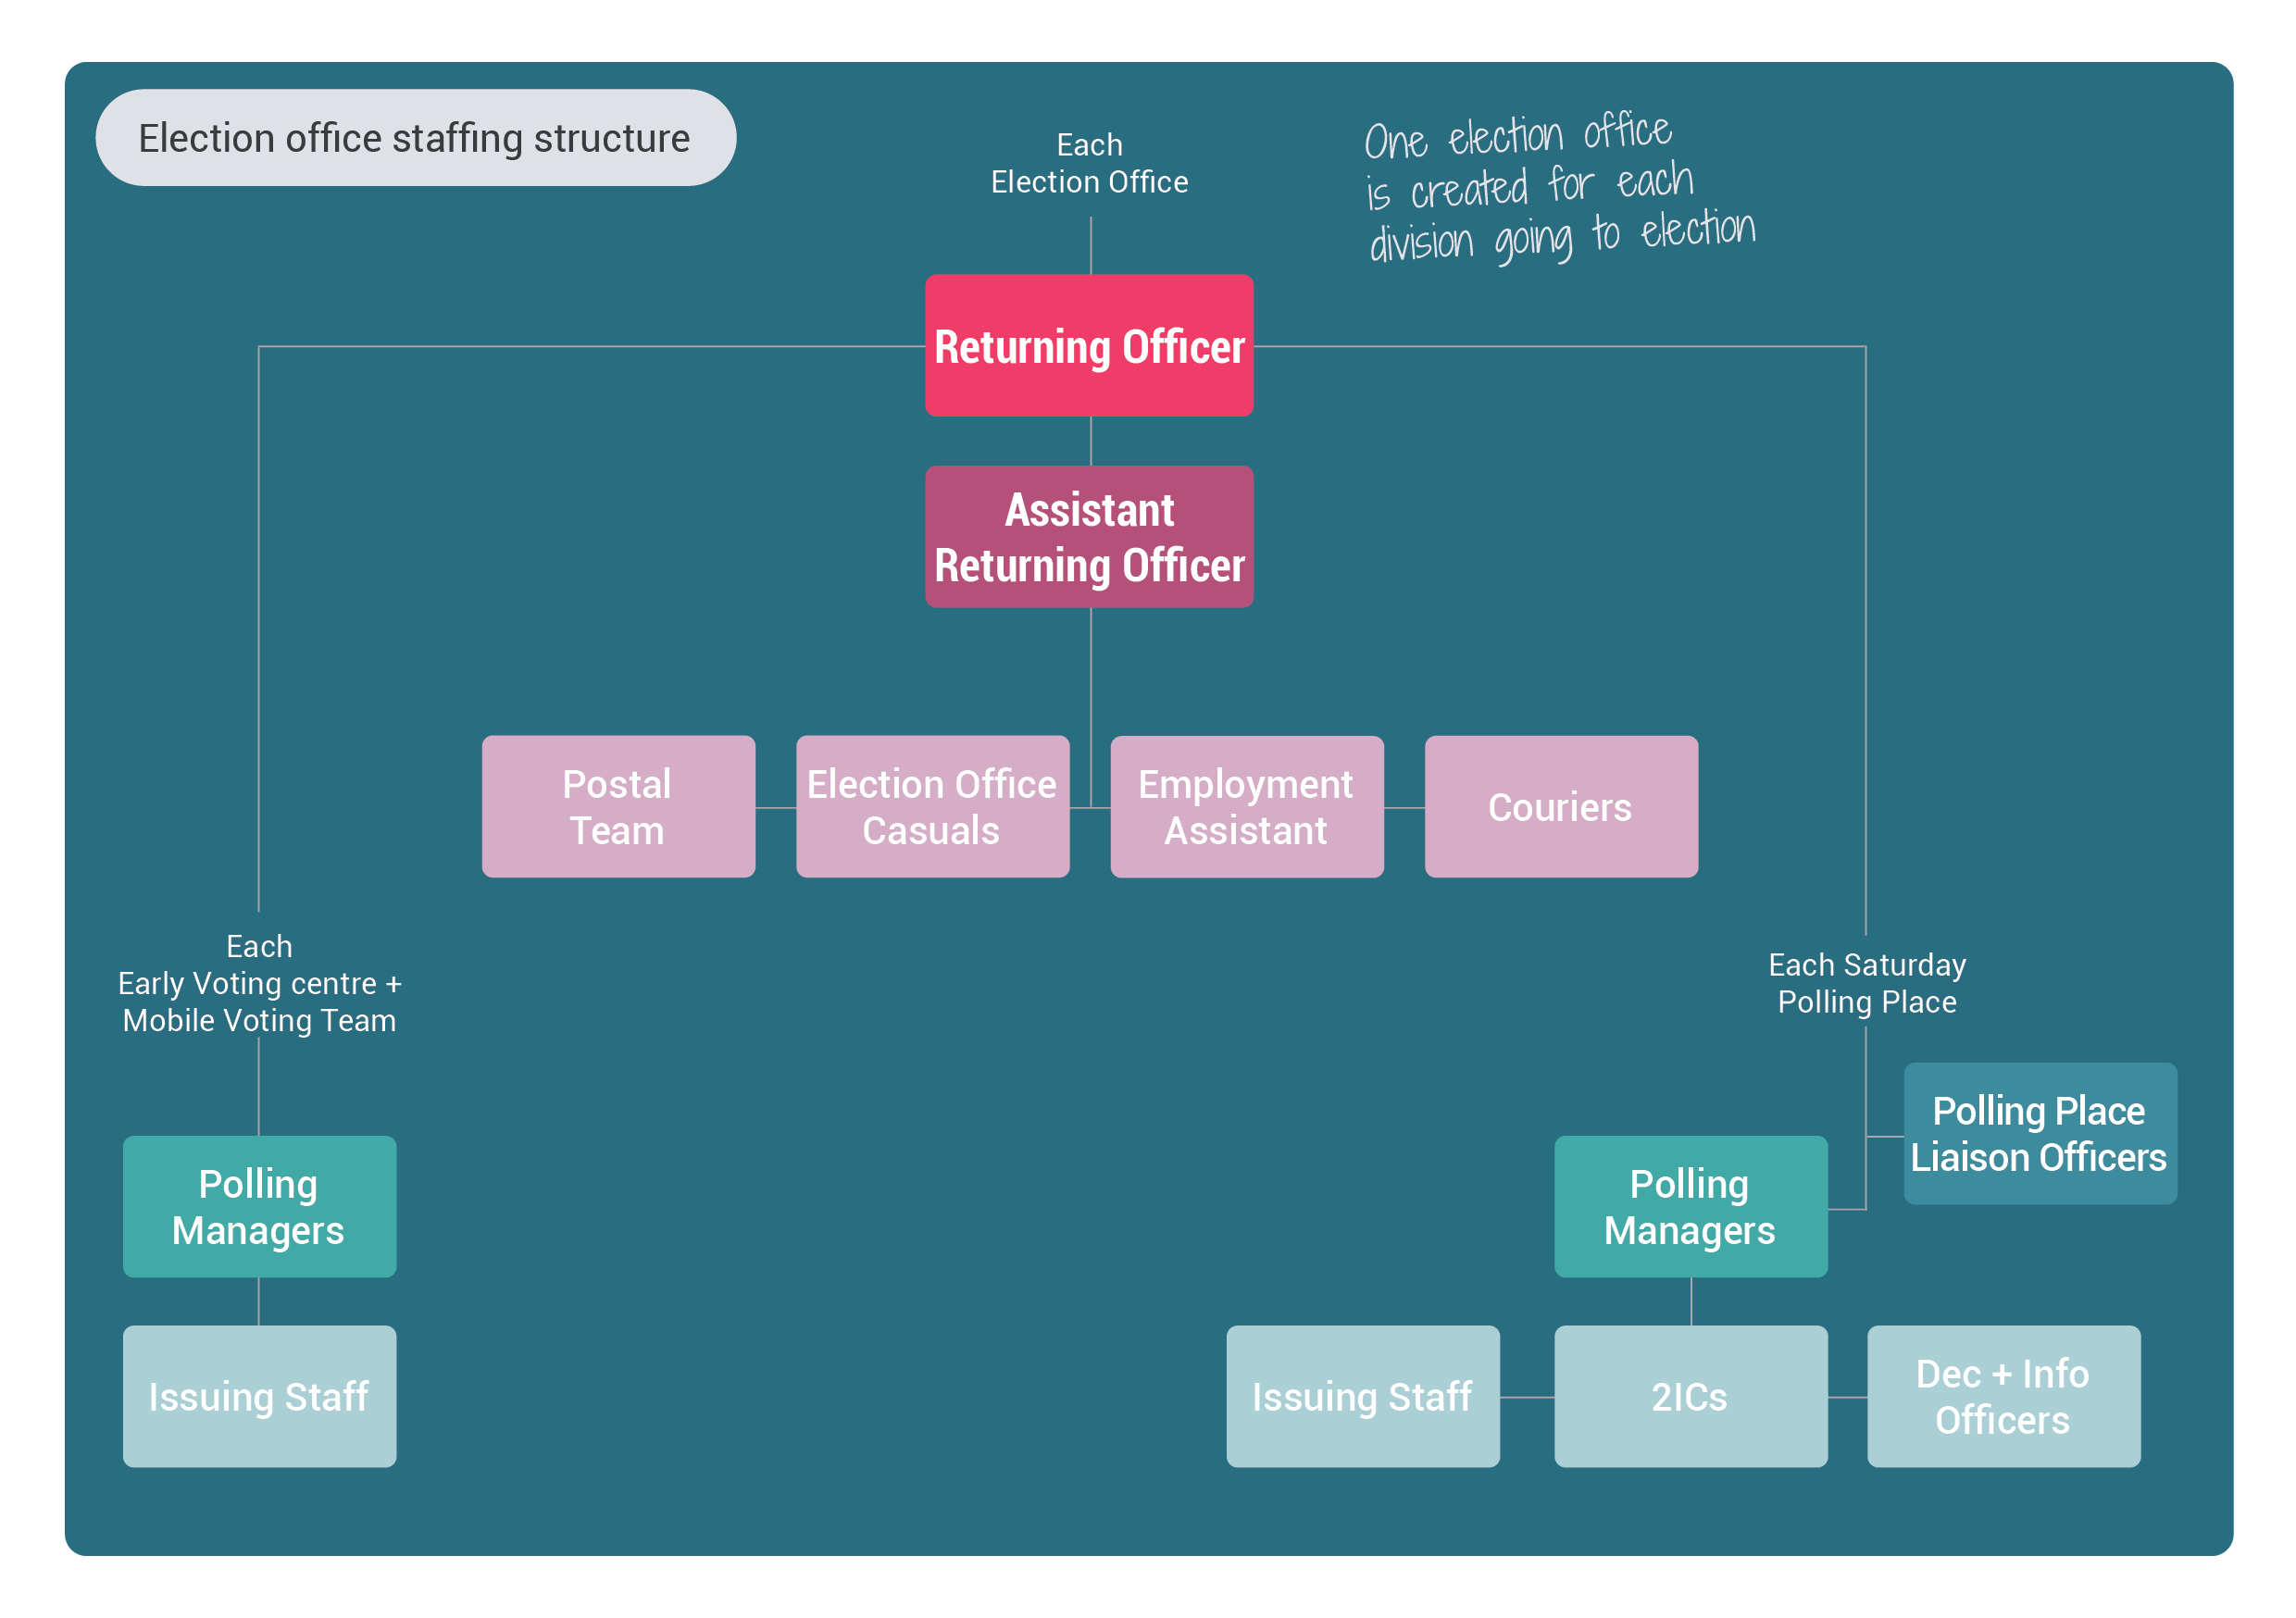 Image of election office structure - Returning officer above Assistant Returning Officer, who manages election office staff, couriers, postal team.  Returning Officer manages early voting and polling place staff